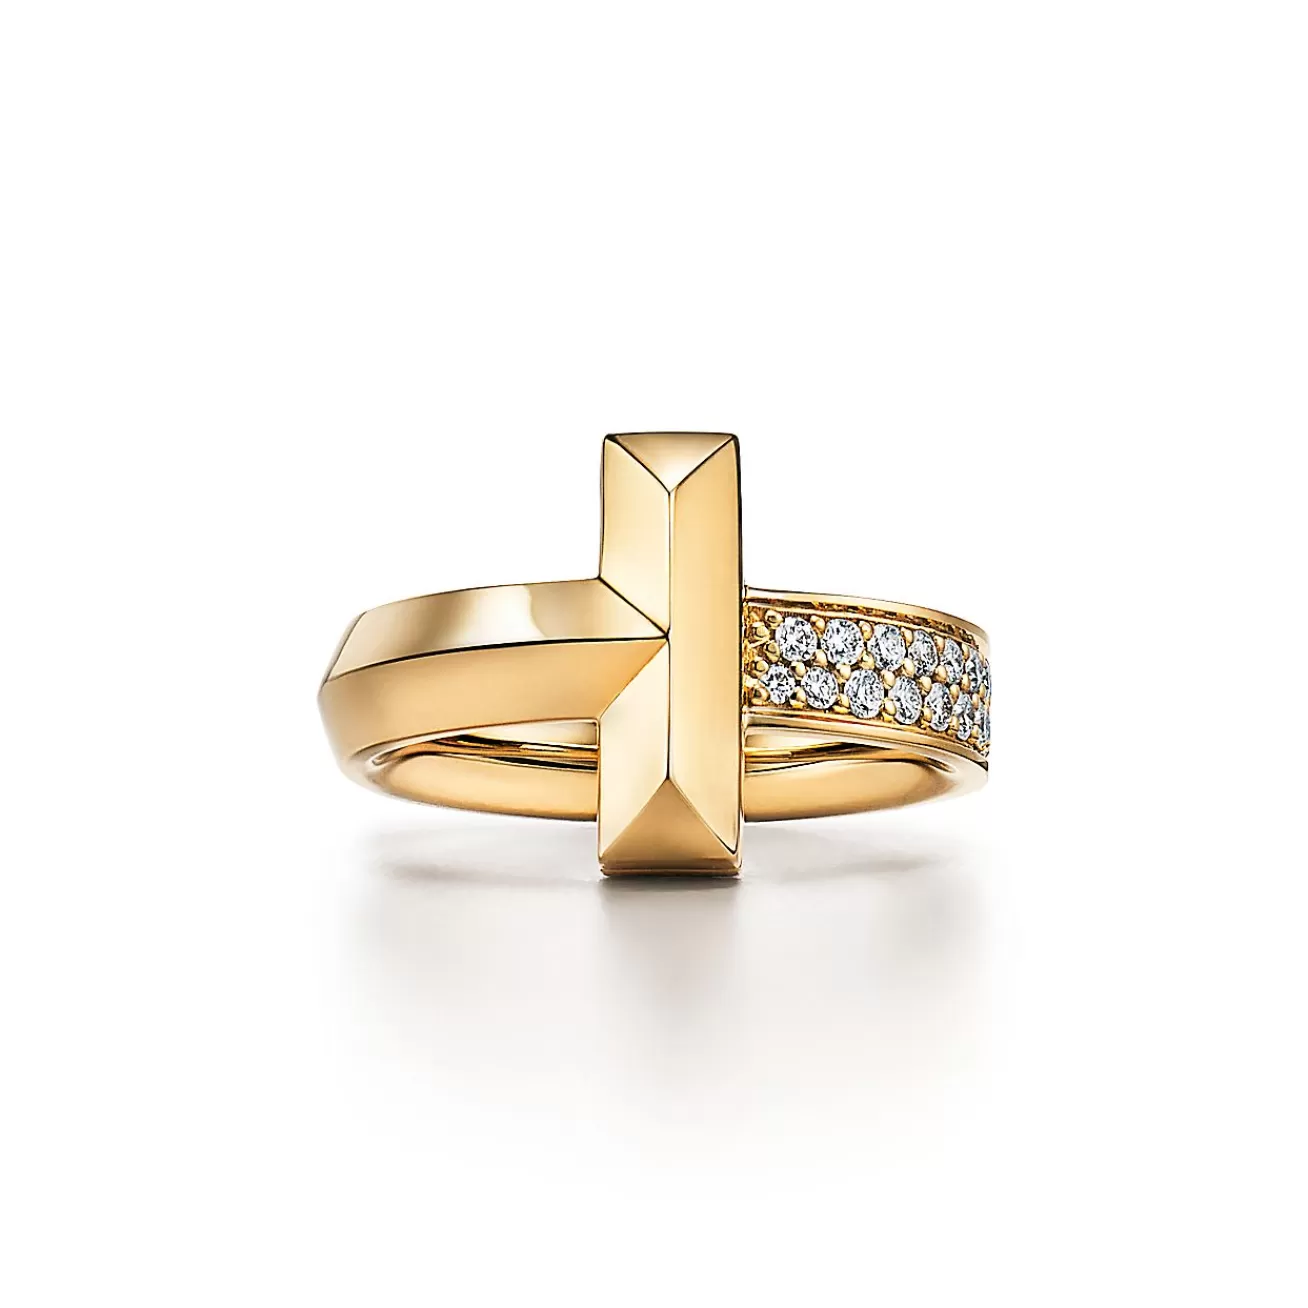 Tiffany & Co. Tiffany T T1 Ring in Yellow Gold with Diamonds, 4.5 mm Wide | ^ Rings | Gold Jewelry